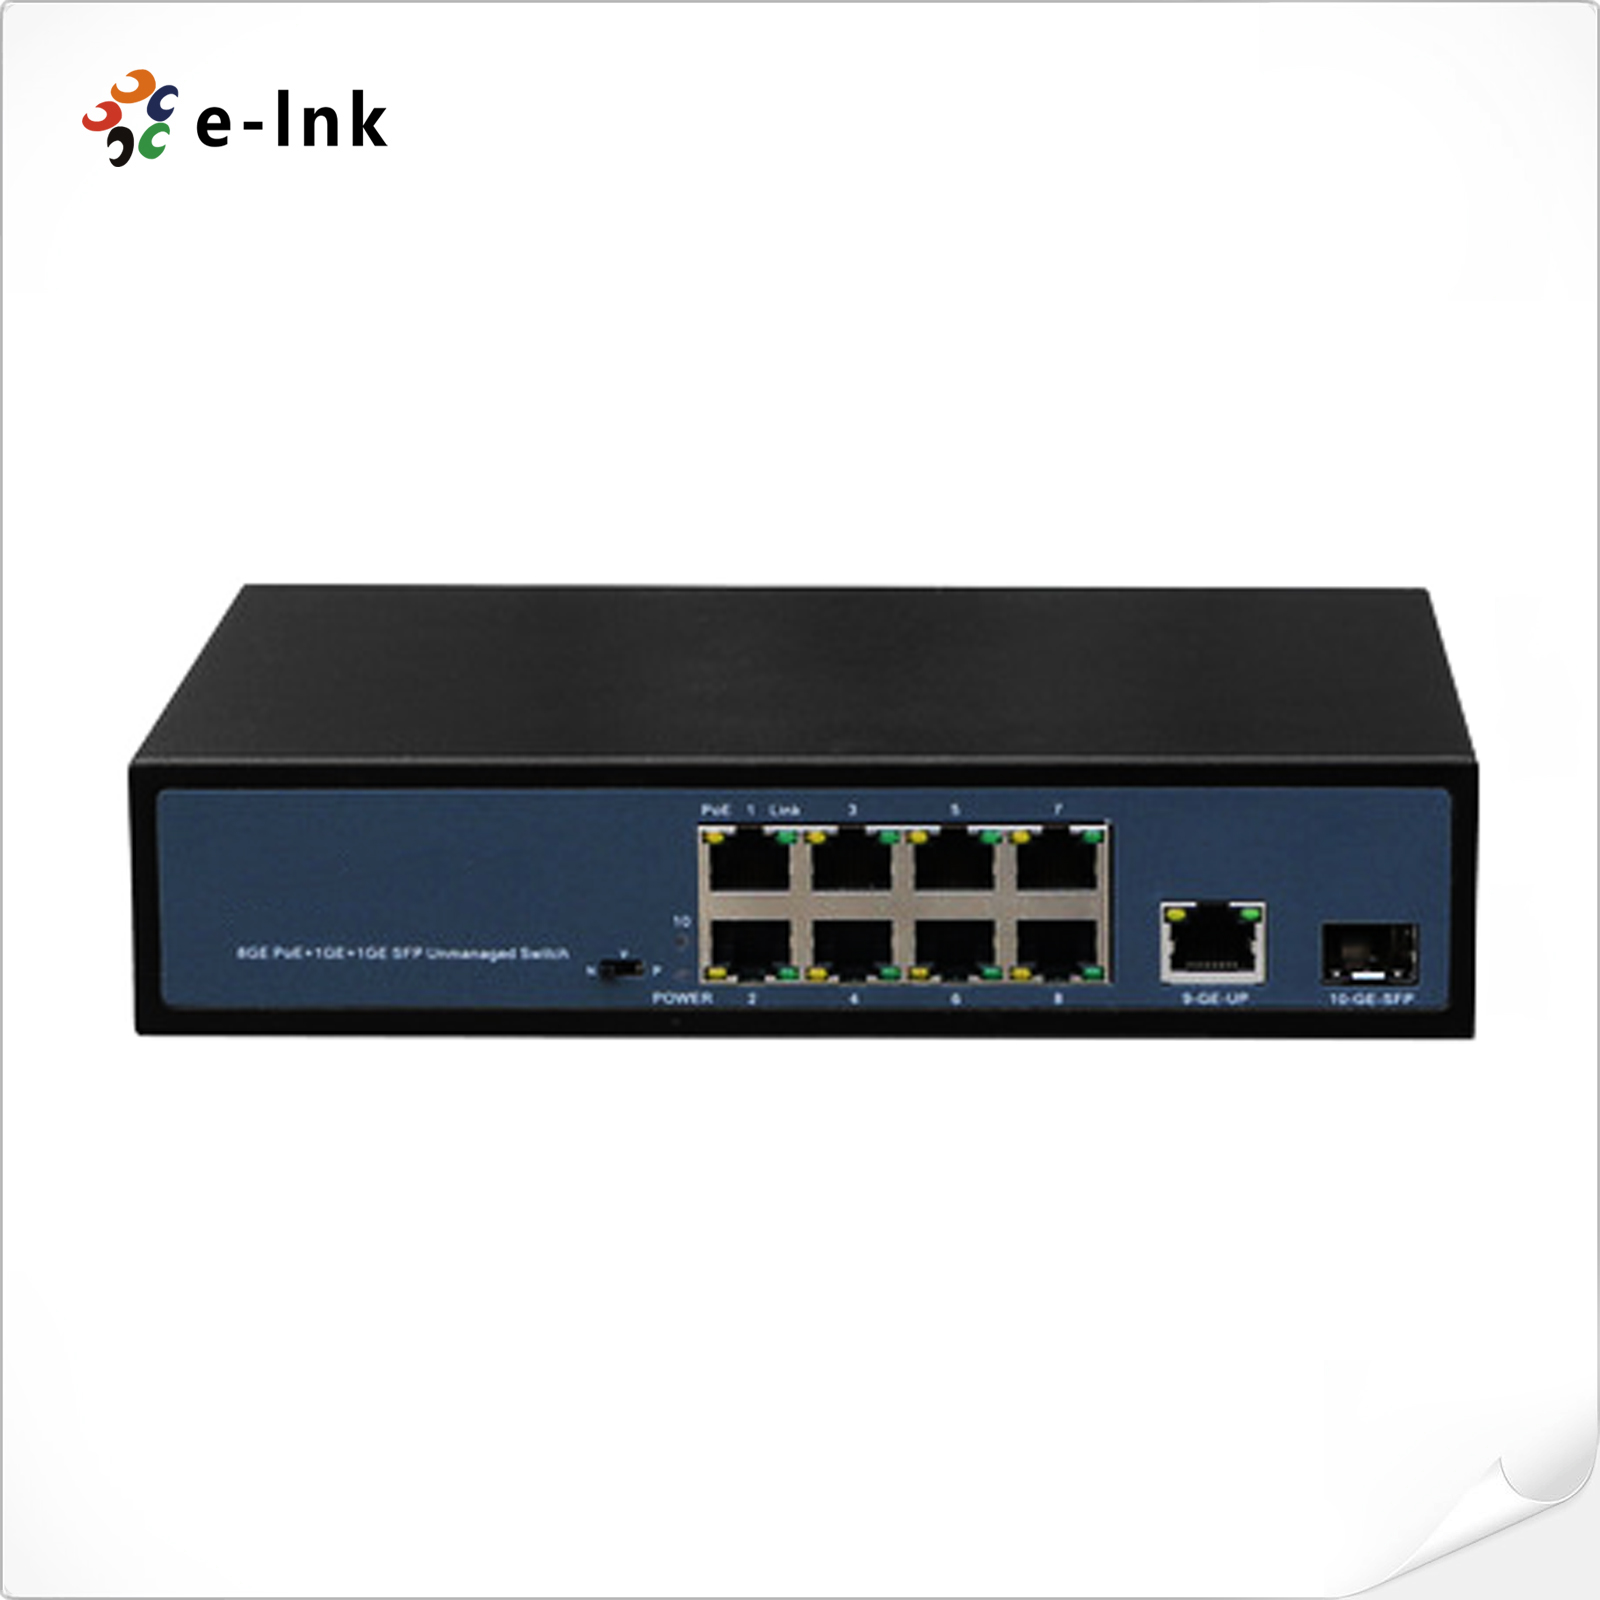 8 Ports 10/100/1000Mbps Gigabit PoE Switch with 1 Uplink and 1 SFP